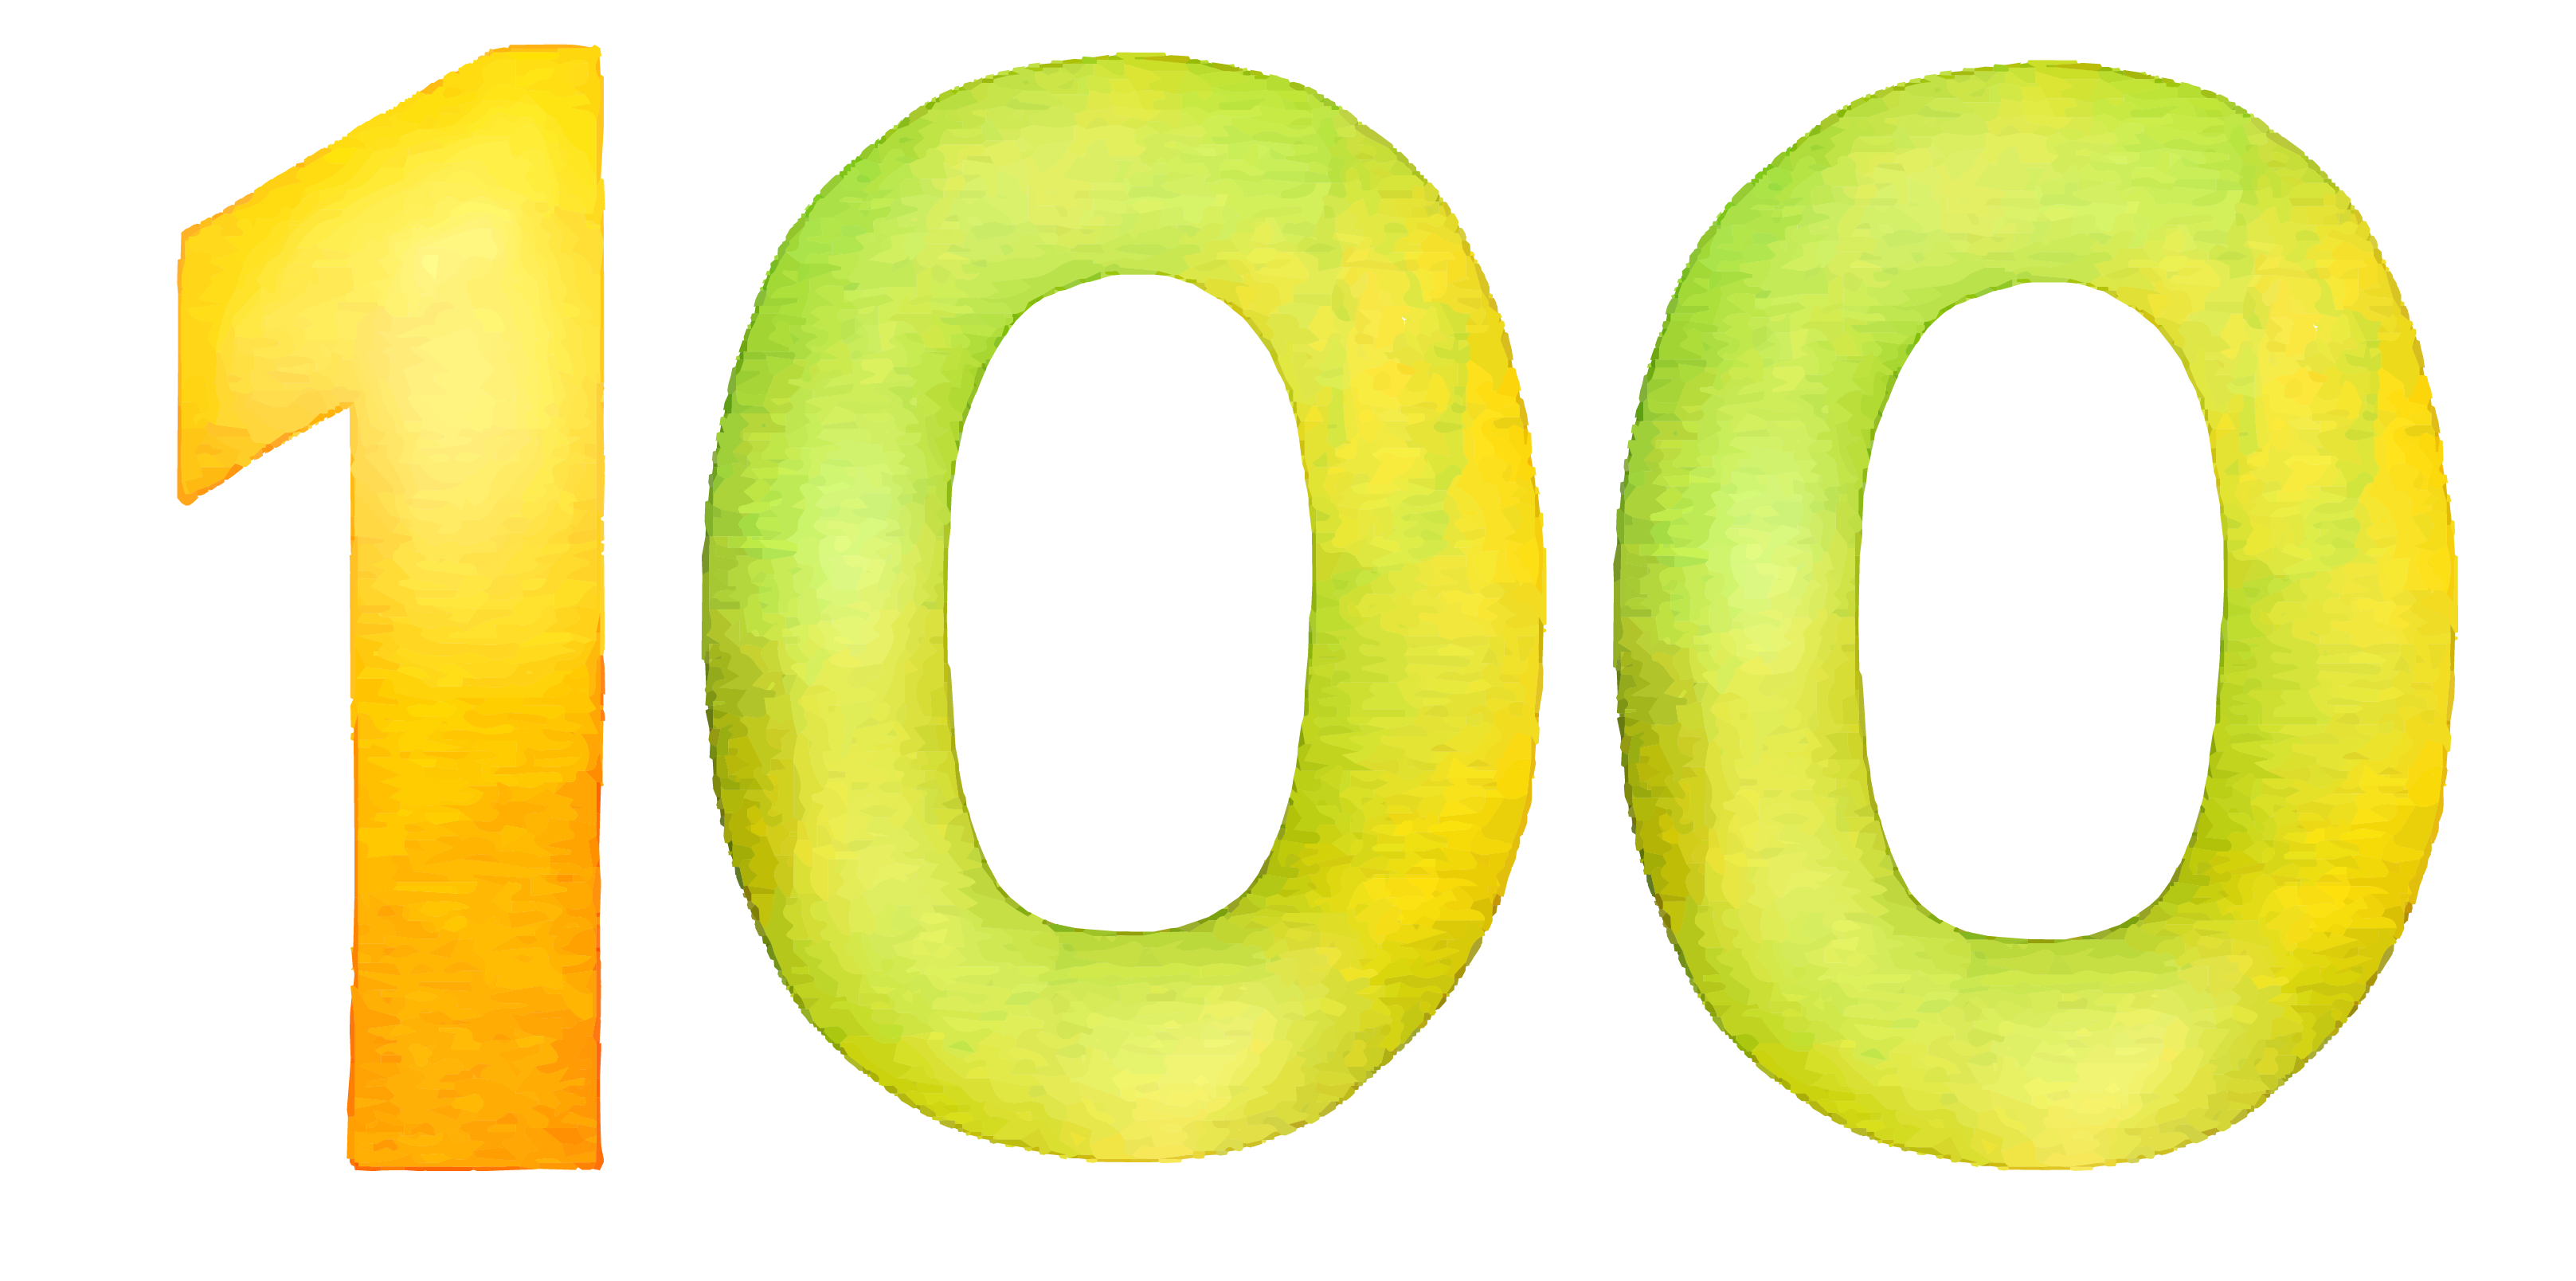 100 Number PNG Royalty-Free Image